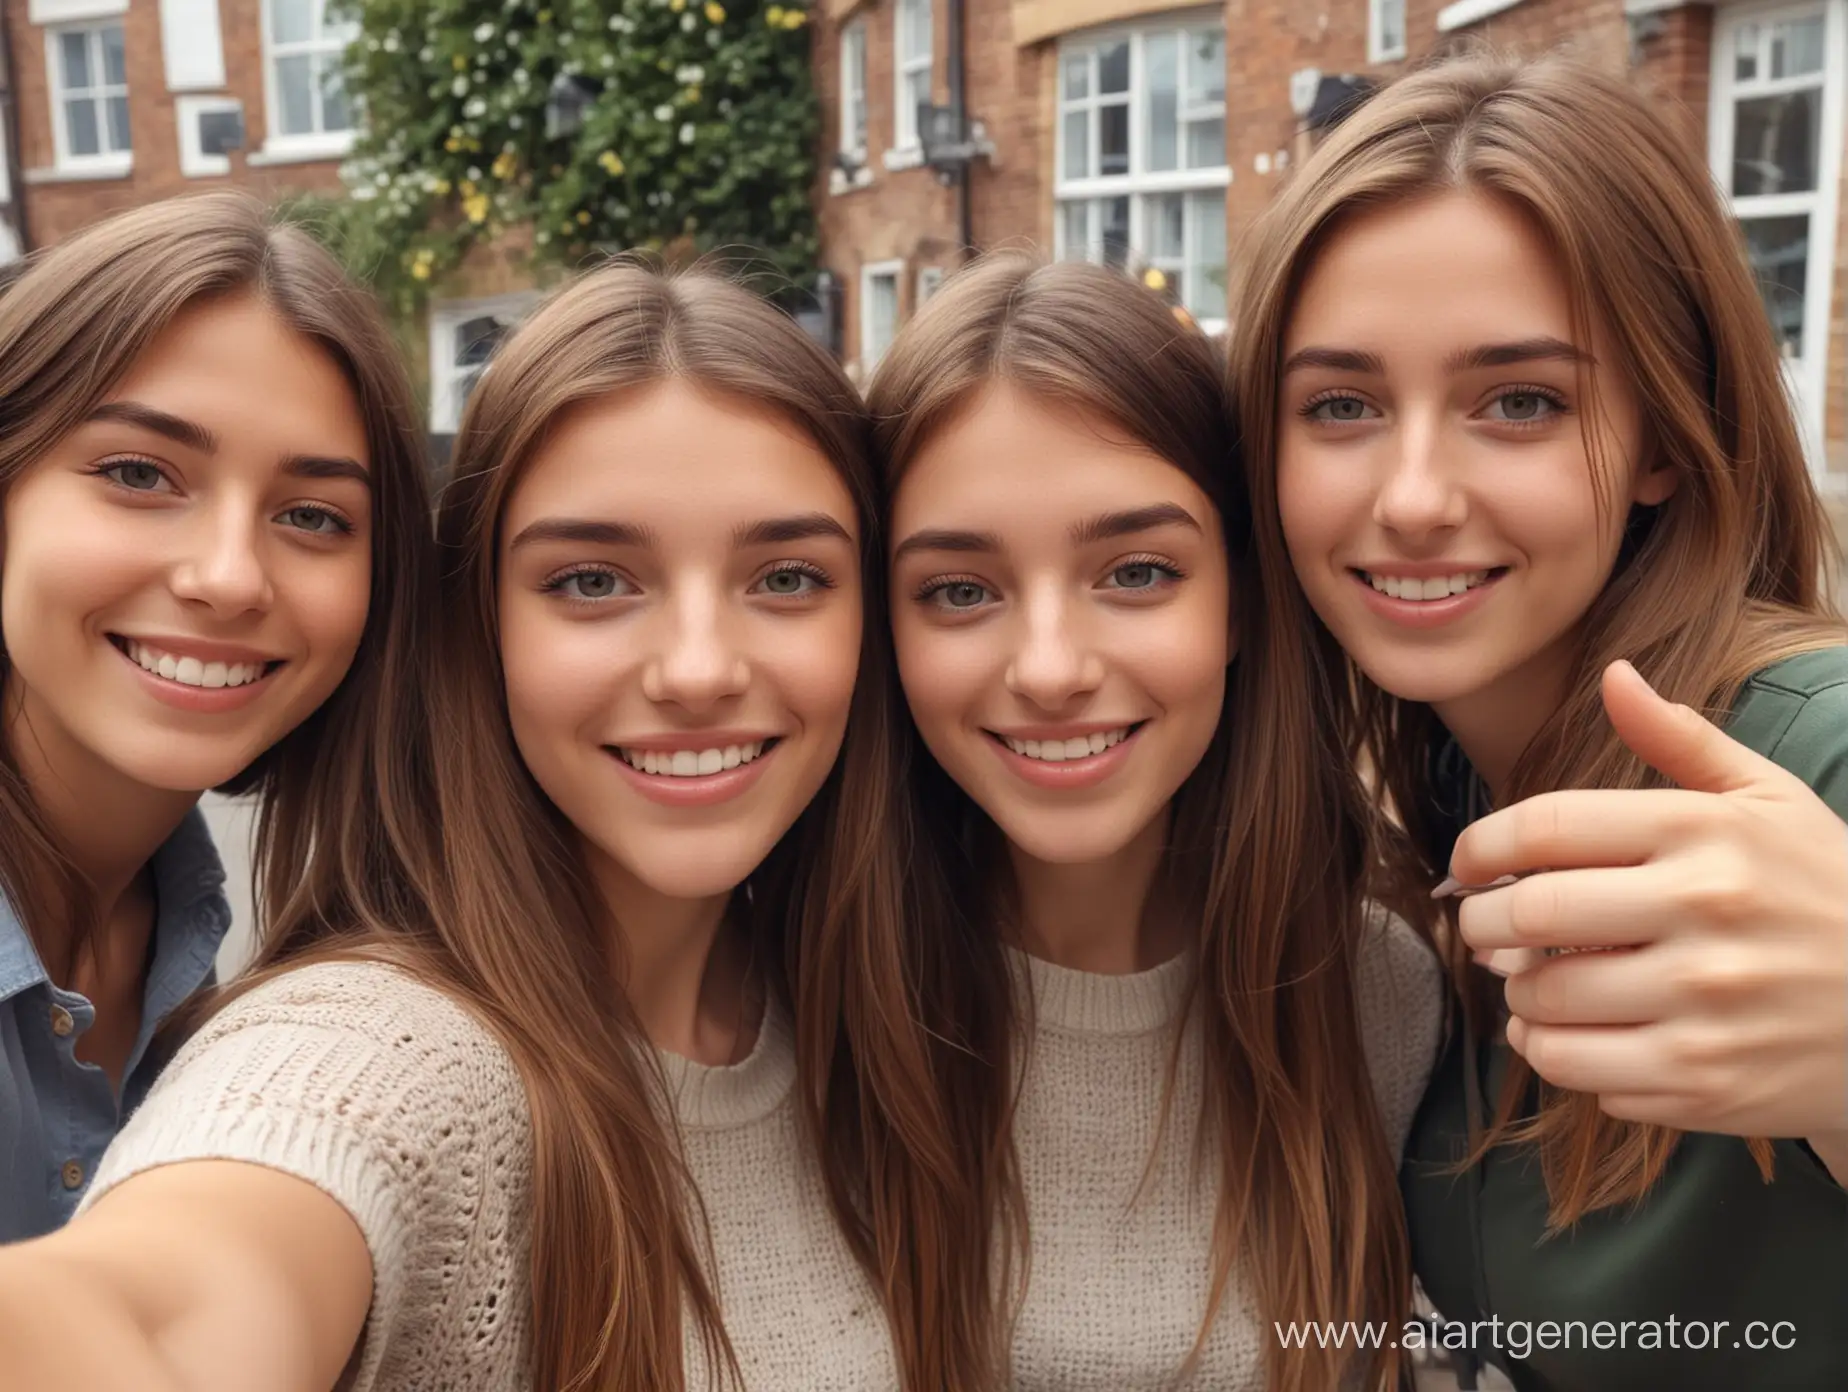 Young-British-Girl-Taking-Realistic-Selfie-with-Friends